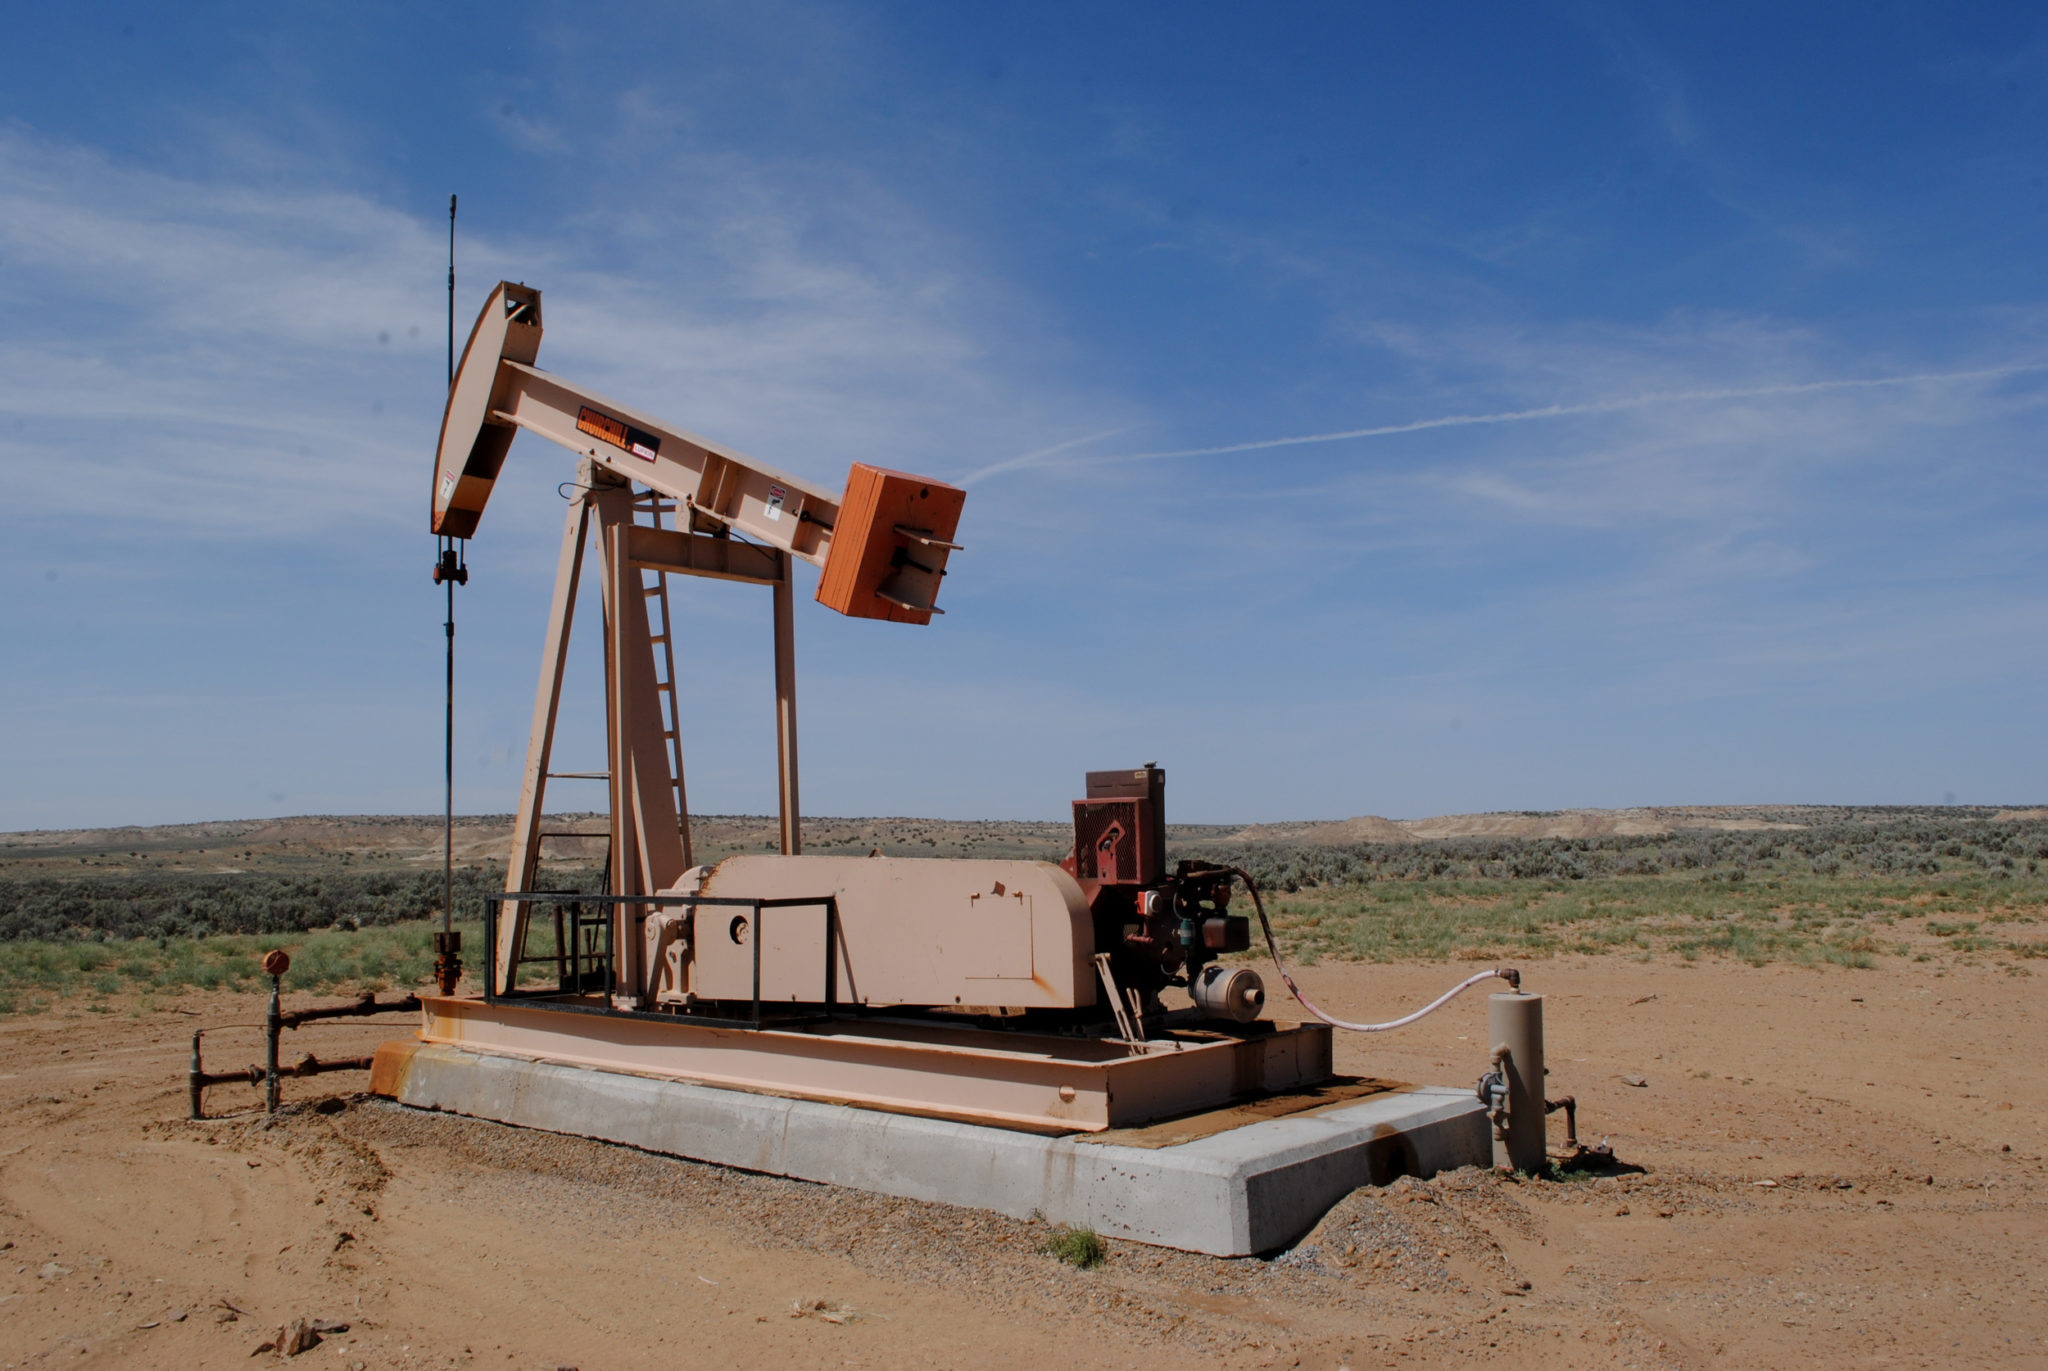 Pump jack near Pierre’s site, which is on the hill in the background. Image courtesy of EcoFlight.